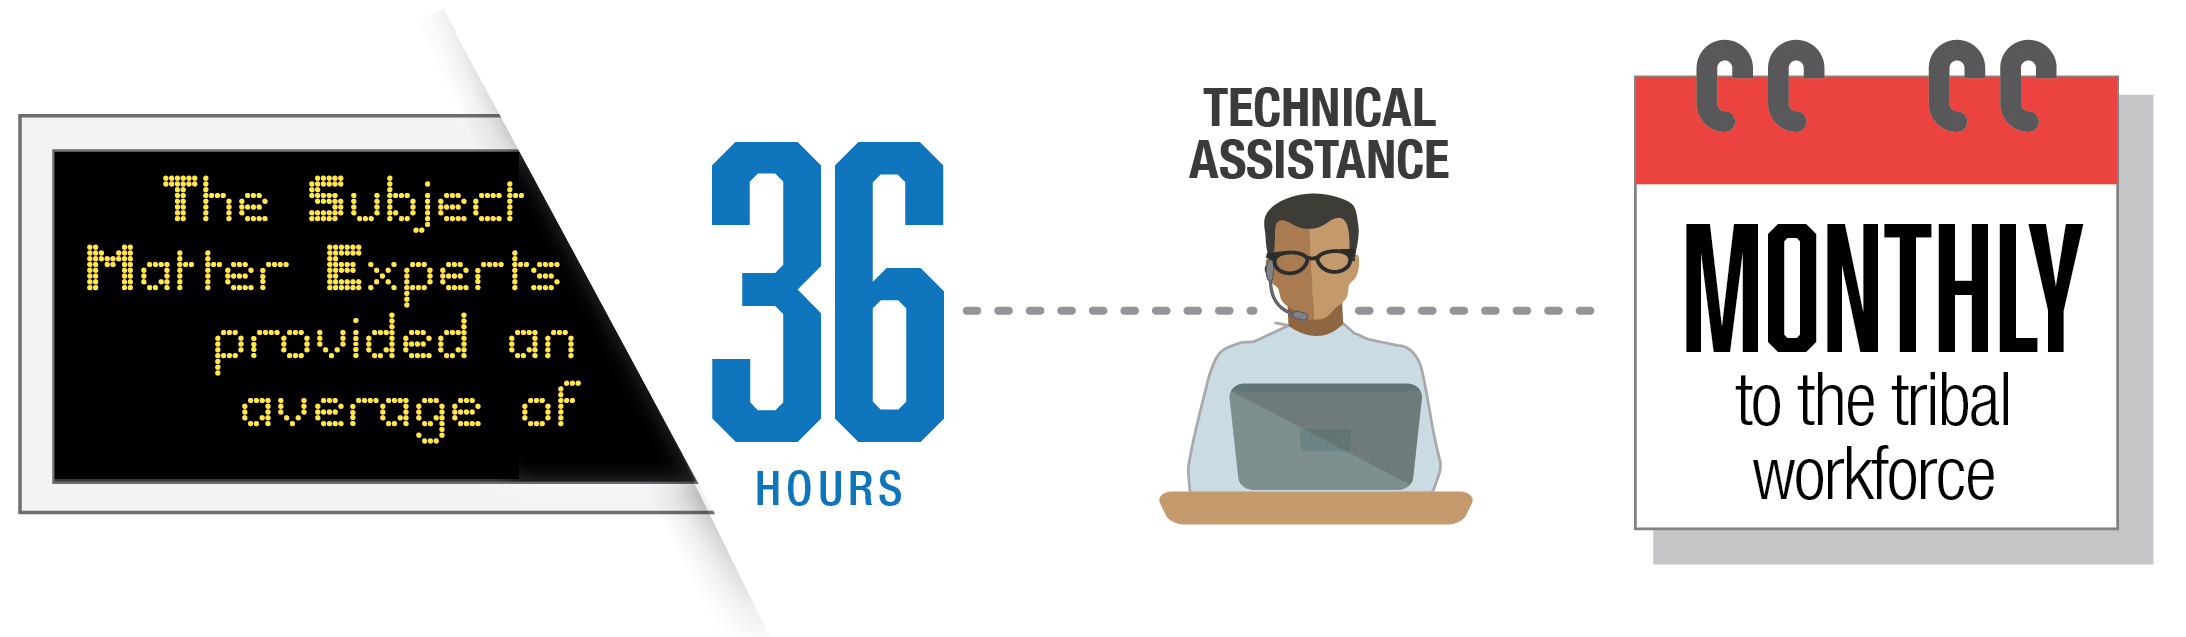 Picture image showing the number of technical assistance hours provided during the pilot.